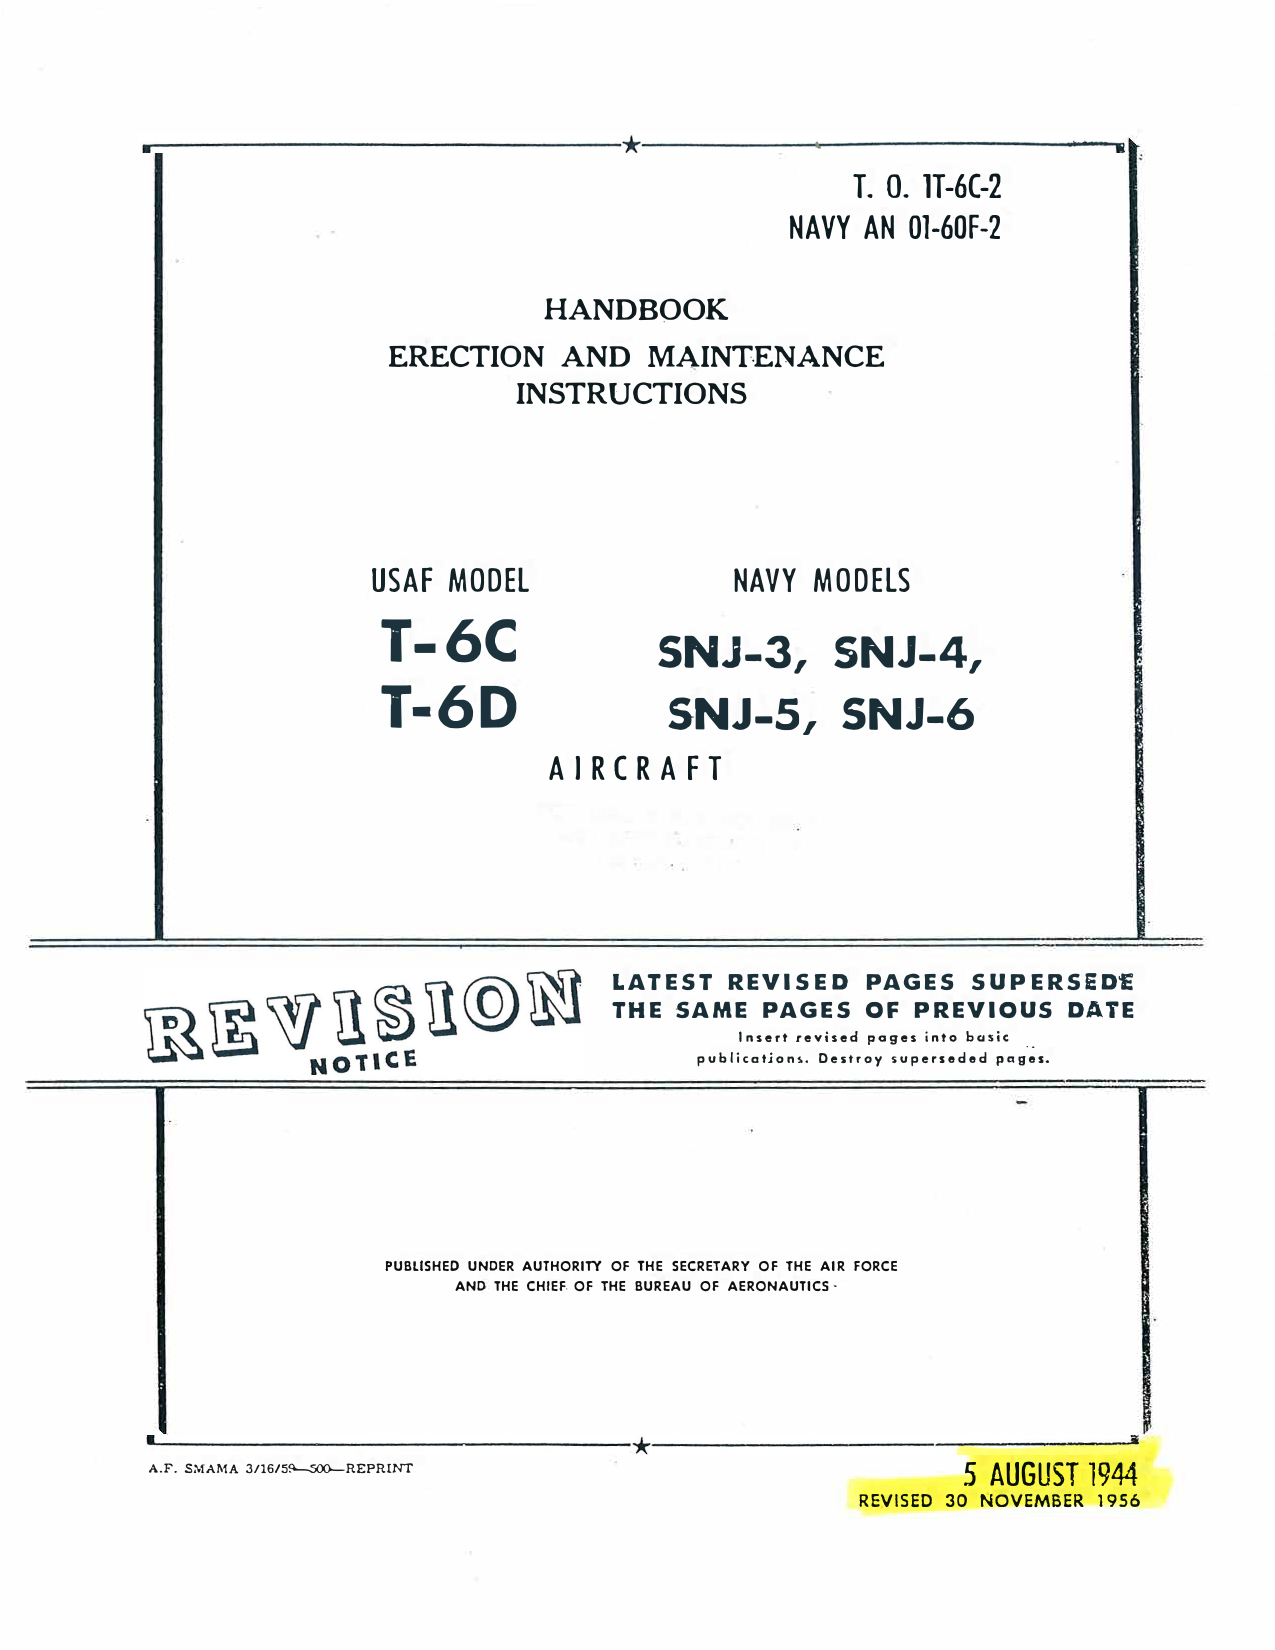 Sample page 1 from AirCorps Library document: Erection & Maintenance - T-6C, T-6D, SNJ-3, SNJ-4, SNJ-5, SNJ-6